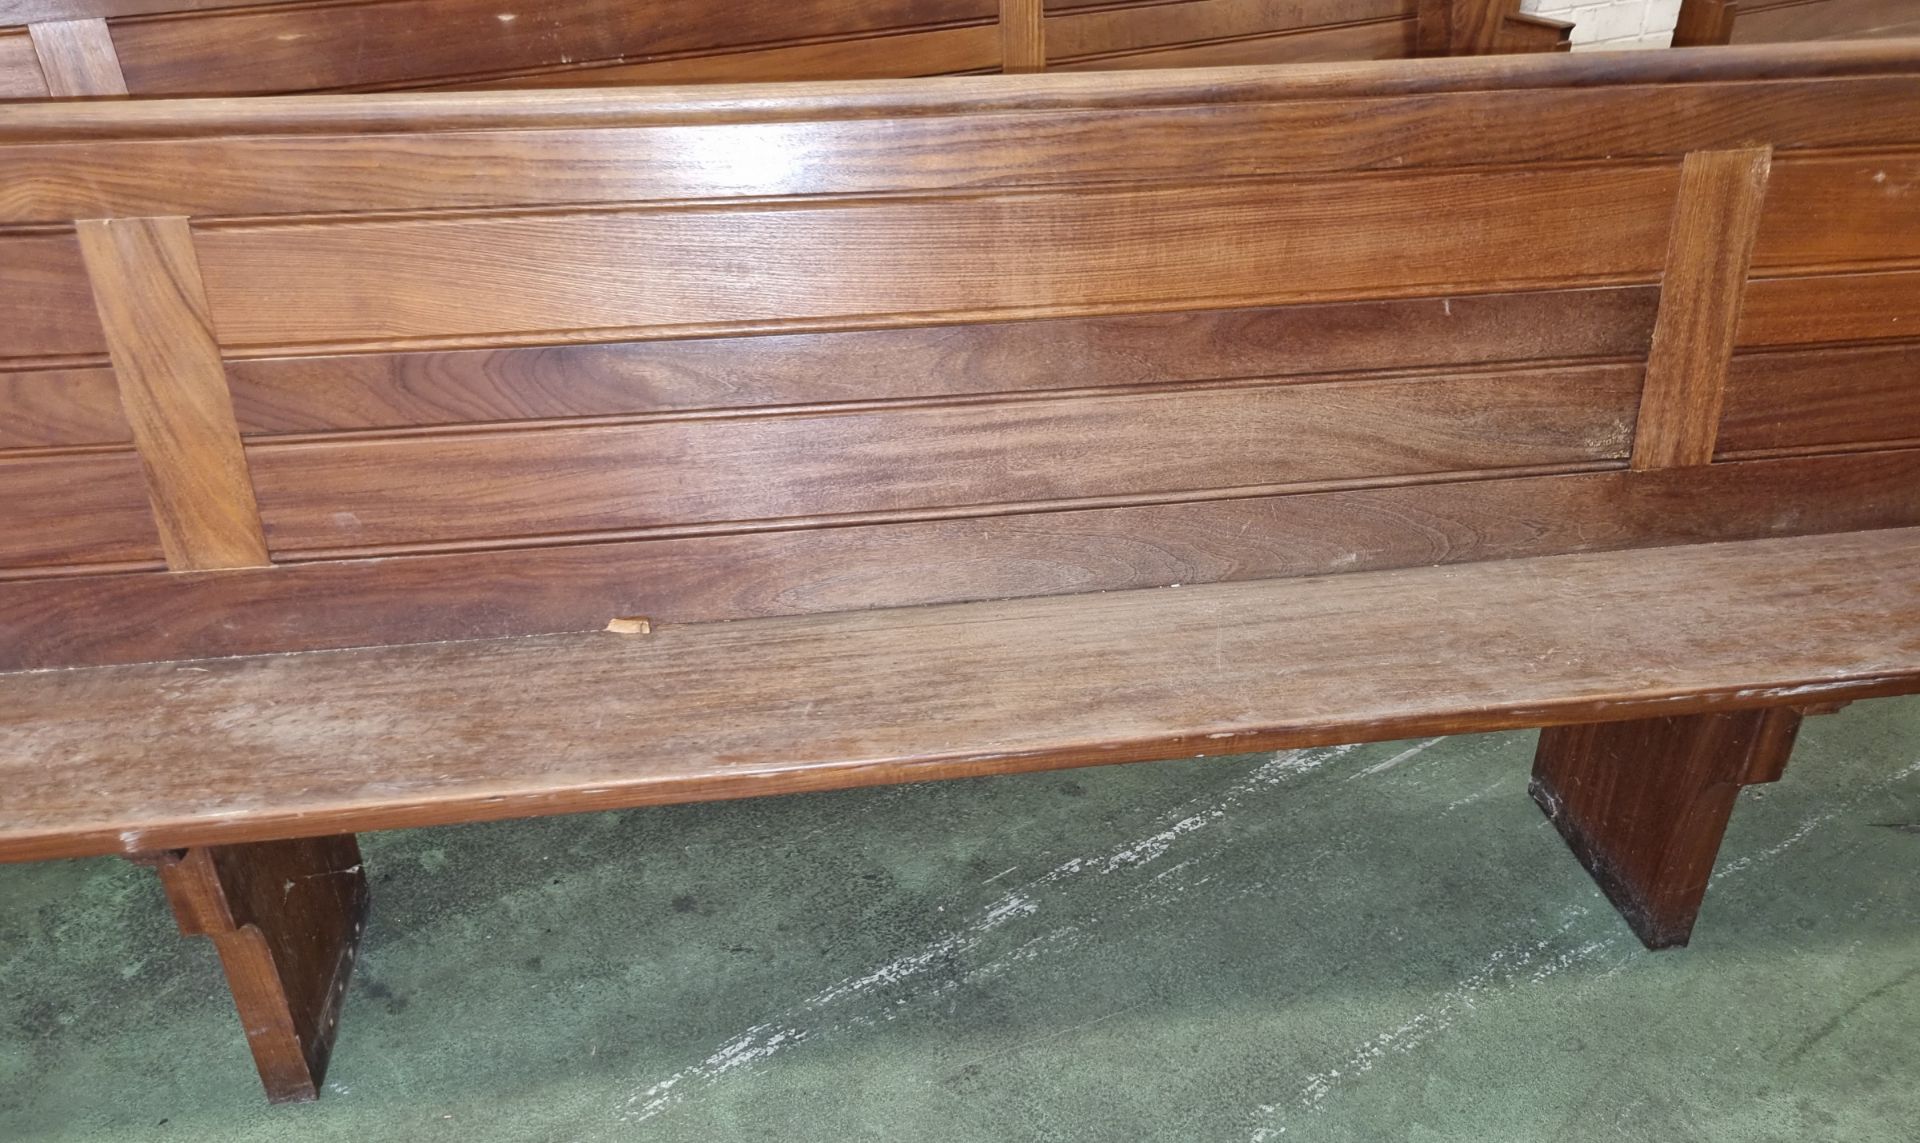 Wooden church pew - L 3570 x W 450 x H 900mm - Image 3 of 5